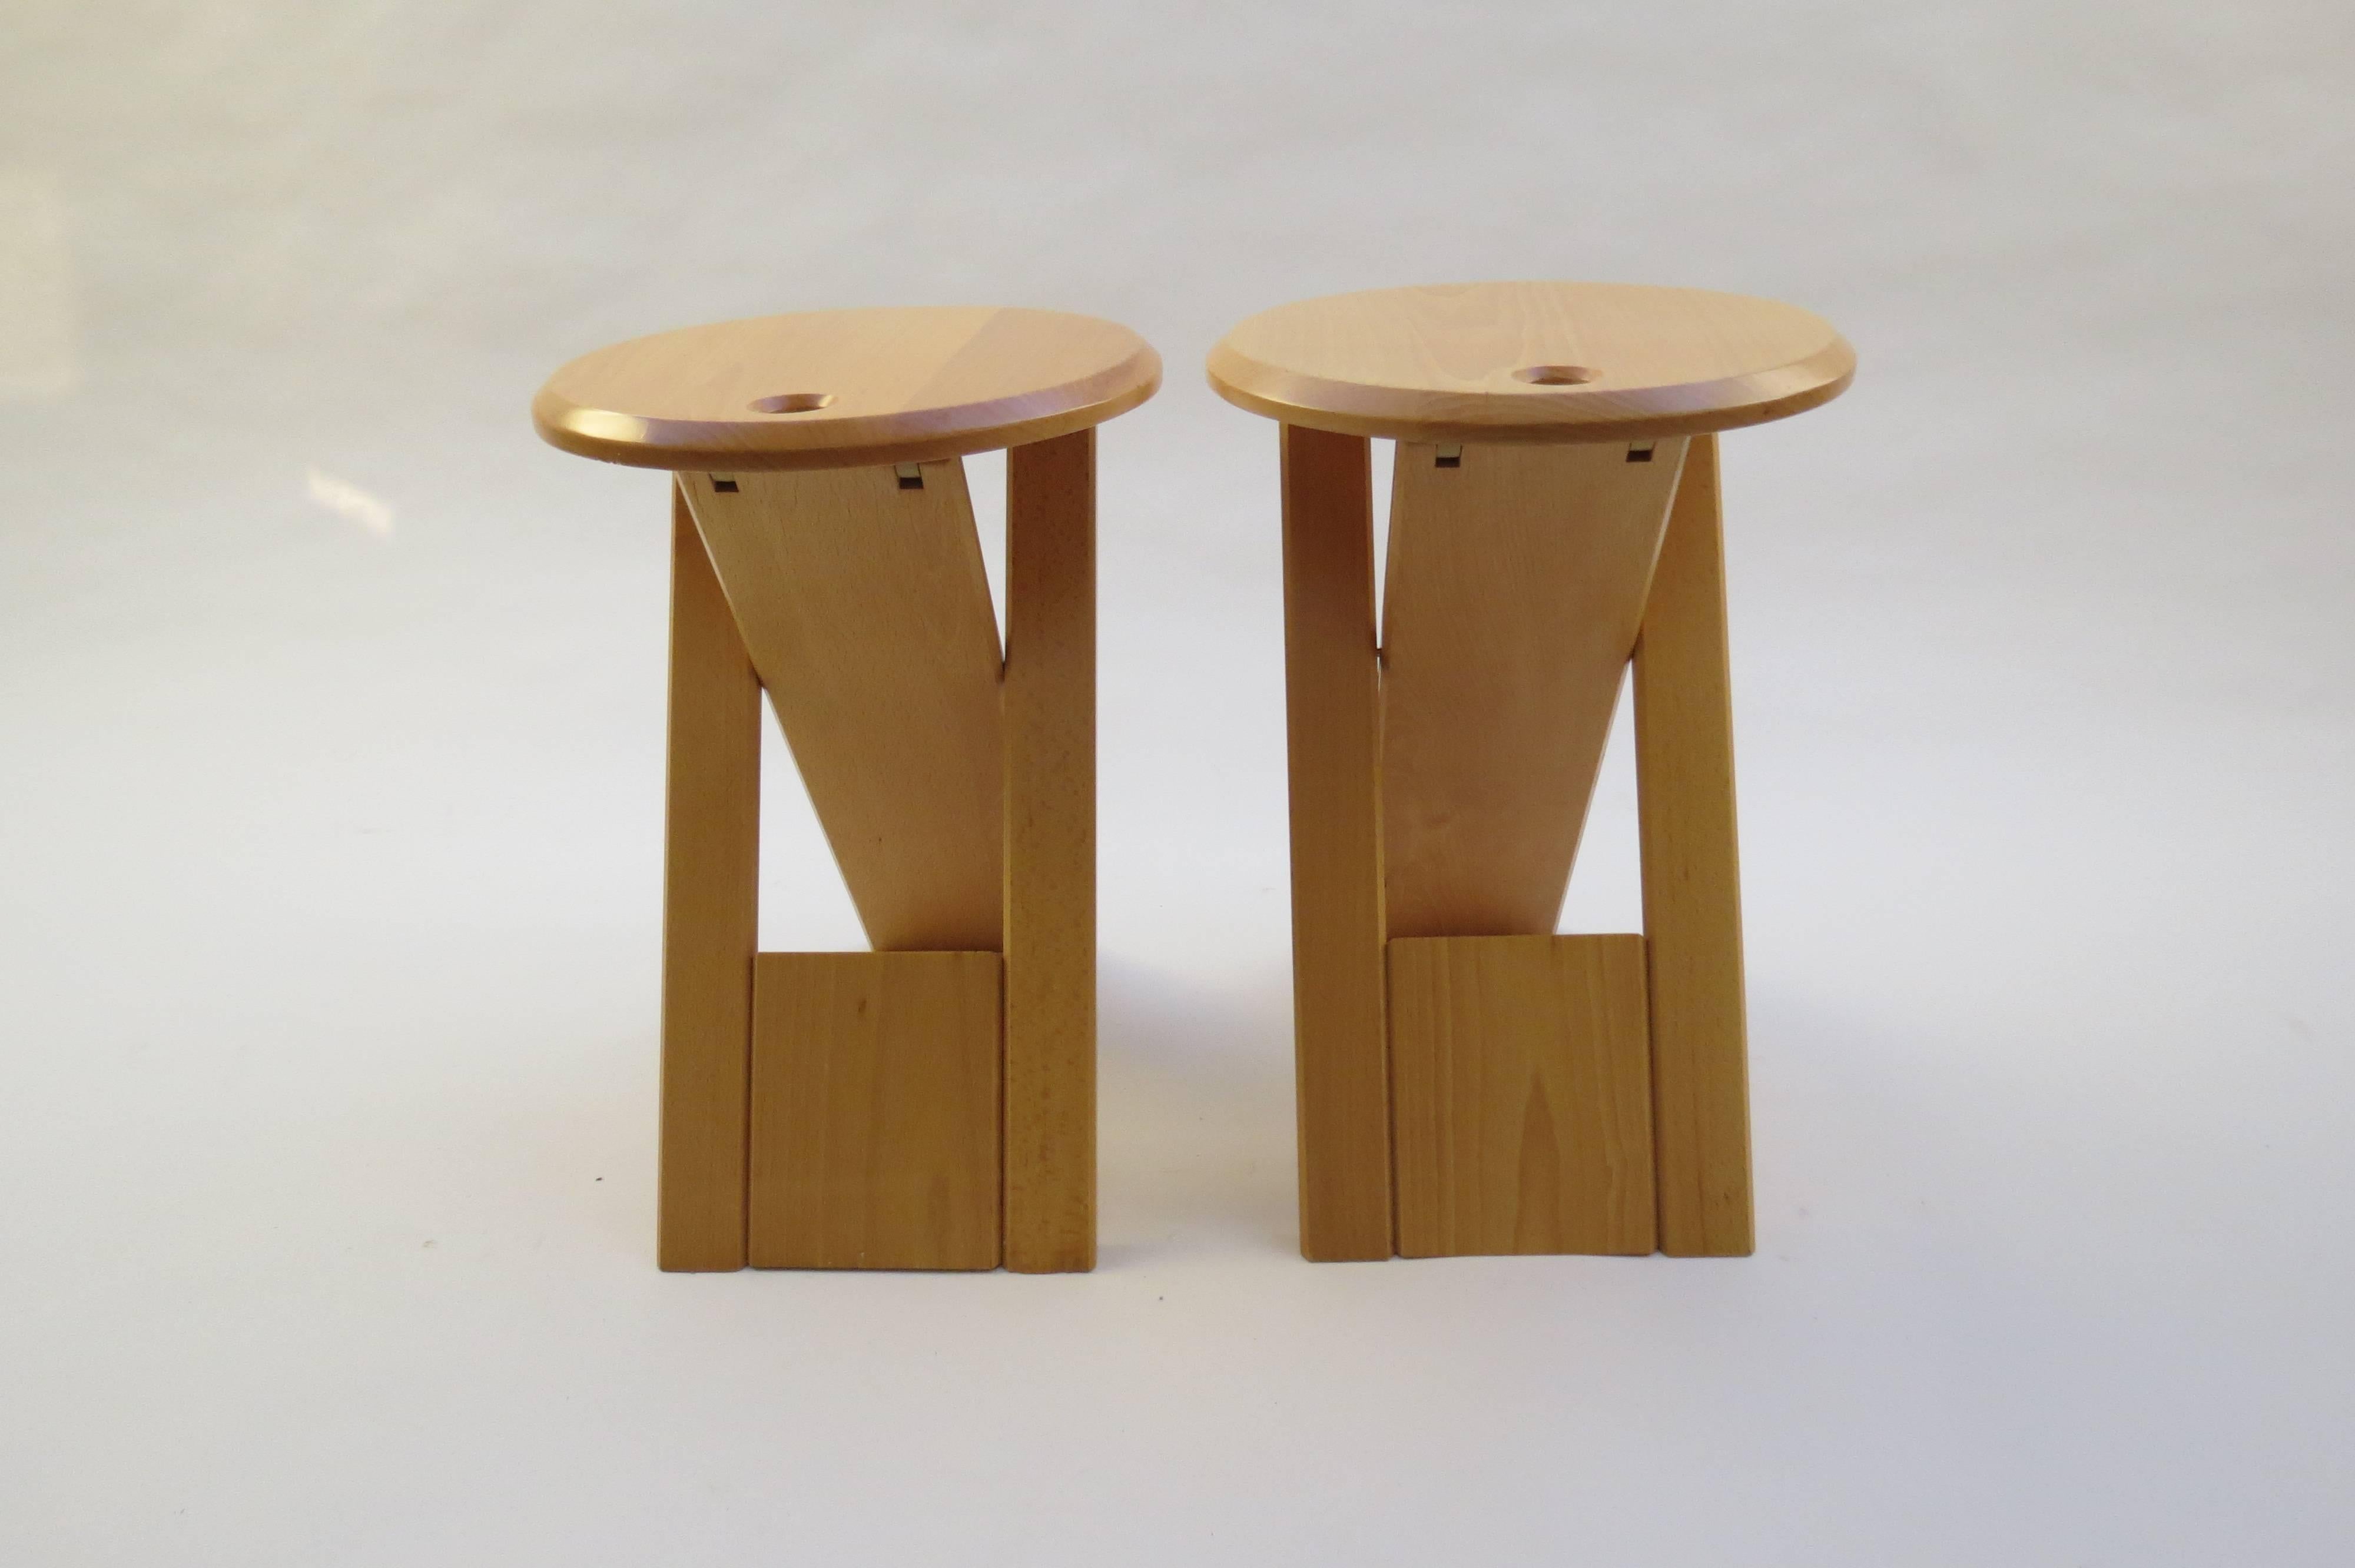 Minimalist Pair of Suzy Stools, Designed 1984-1985 by Adrian Reed for Princes Design Works